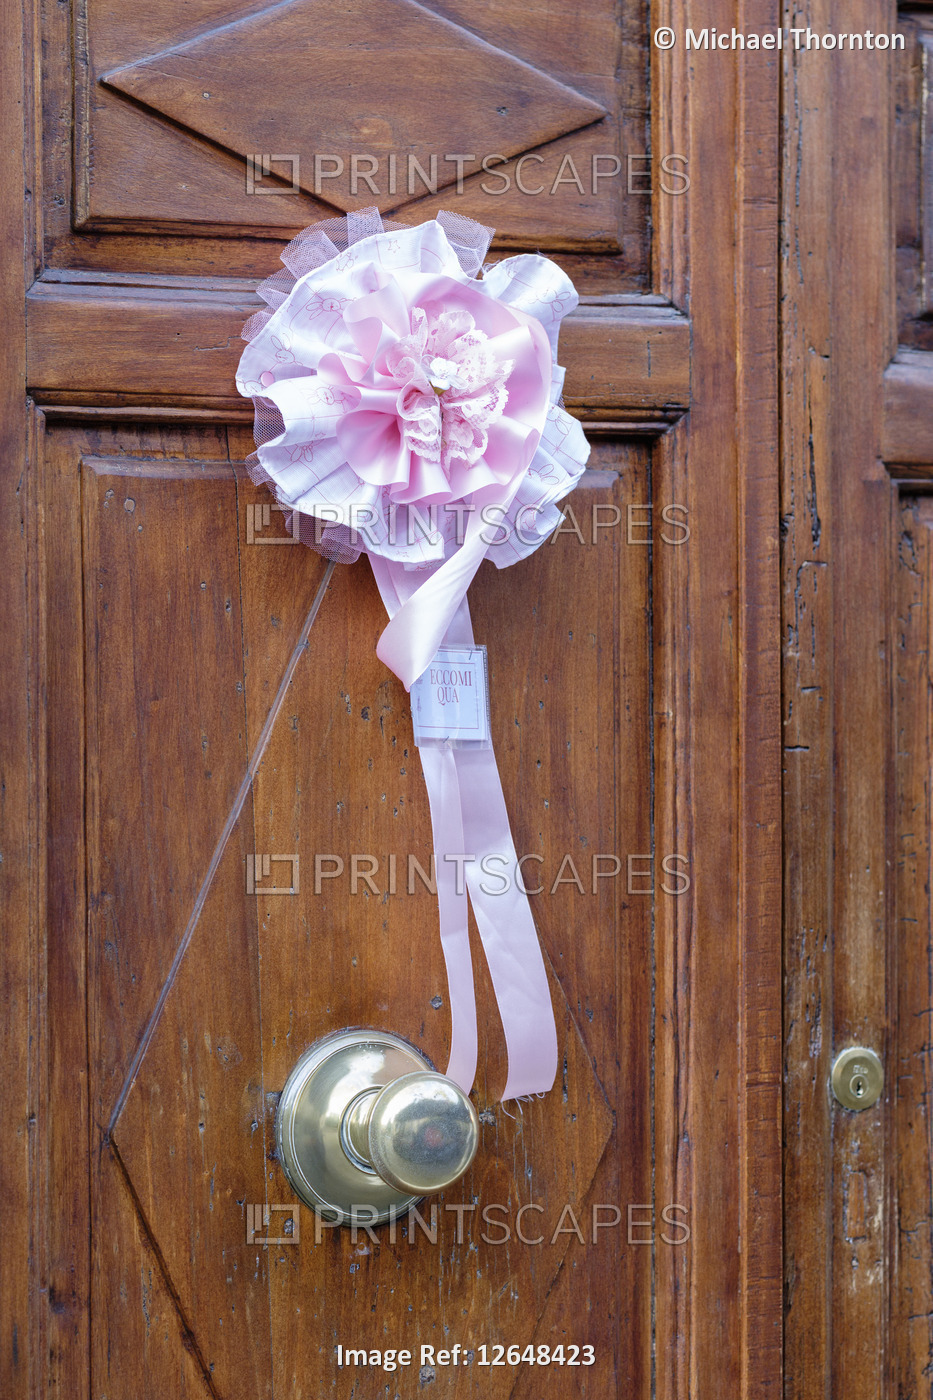 Birth of a child denoted by flower and ribbon on wooden entrance door, Pisa. ...